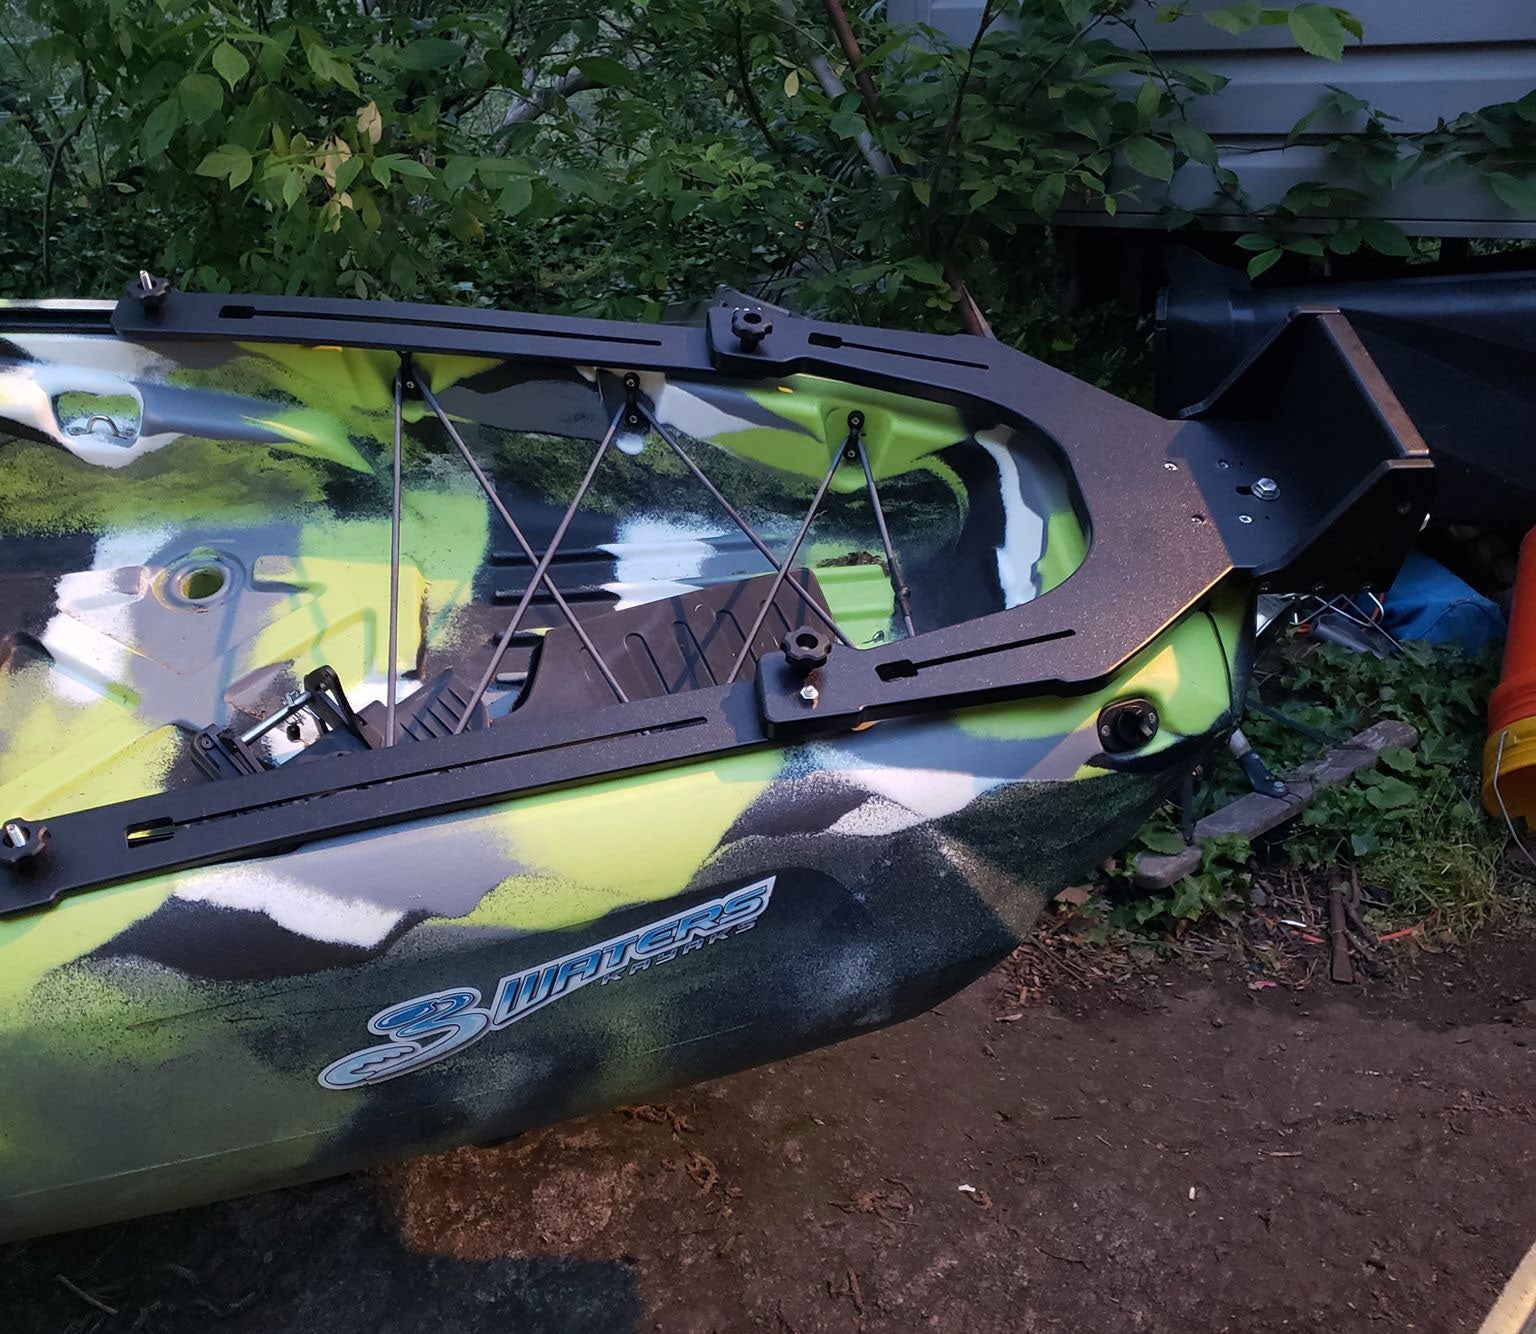 Got my big fish 120 yesterday and mounted a trolling motor today